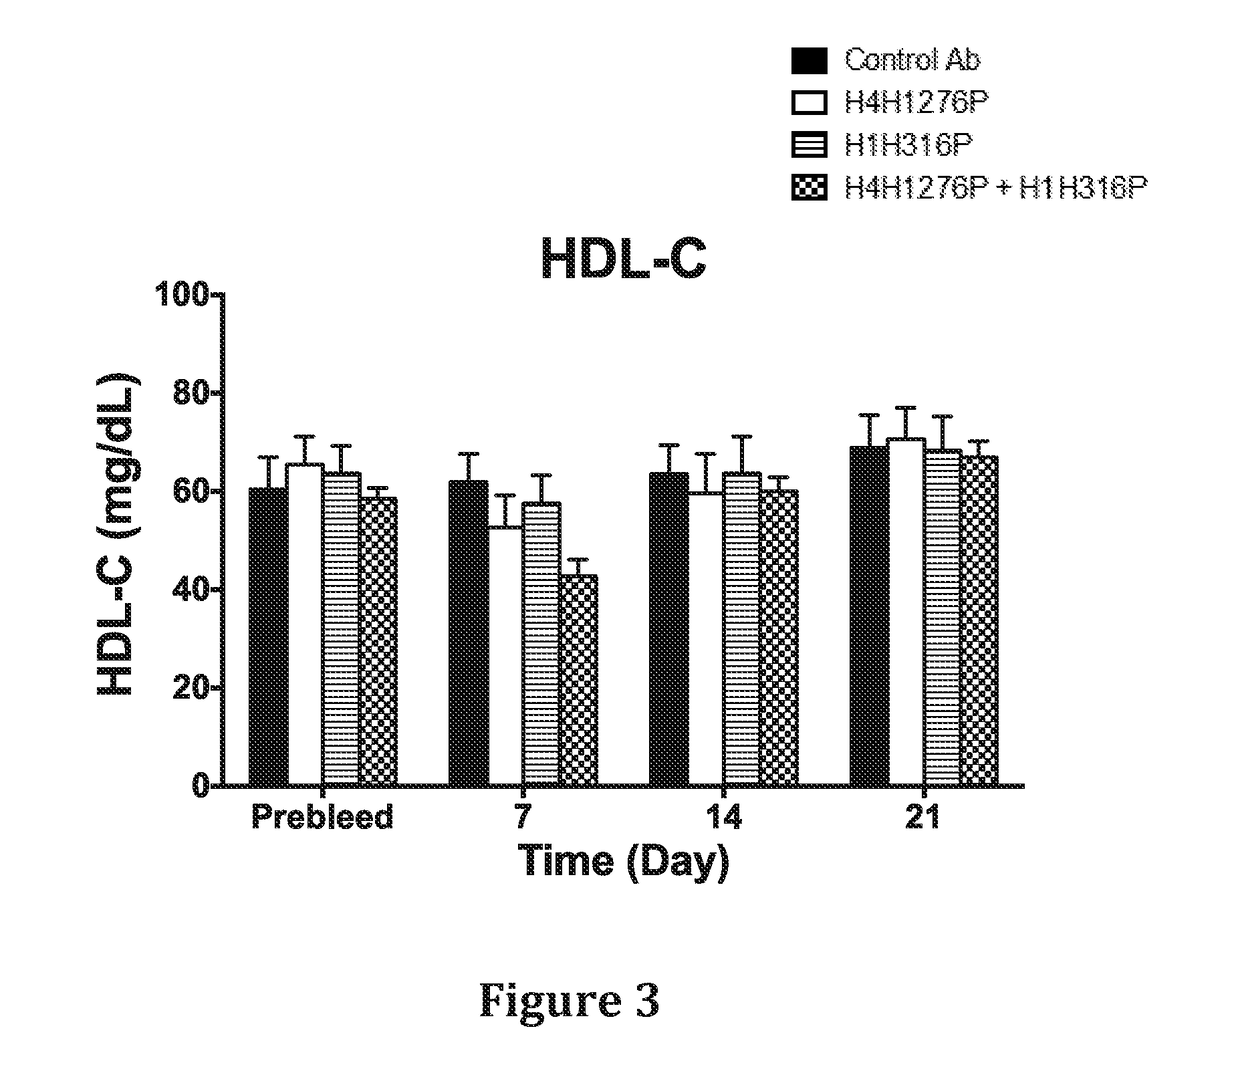 Methods for Treating Patients with Hyperlipidemia by Administering a PCSK9 Inhibitor in Combination with an ANGPTL3 Inhibitor